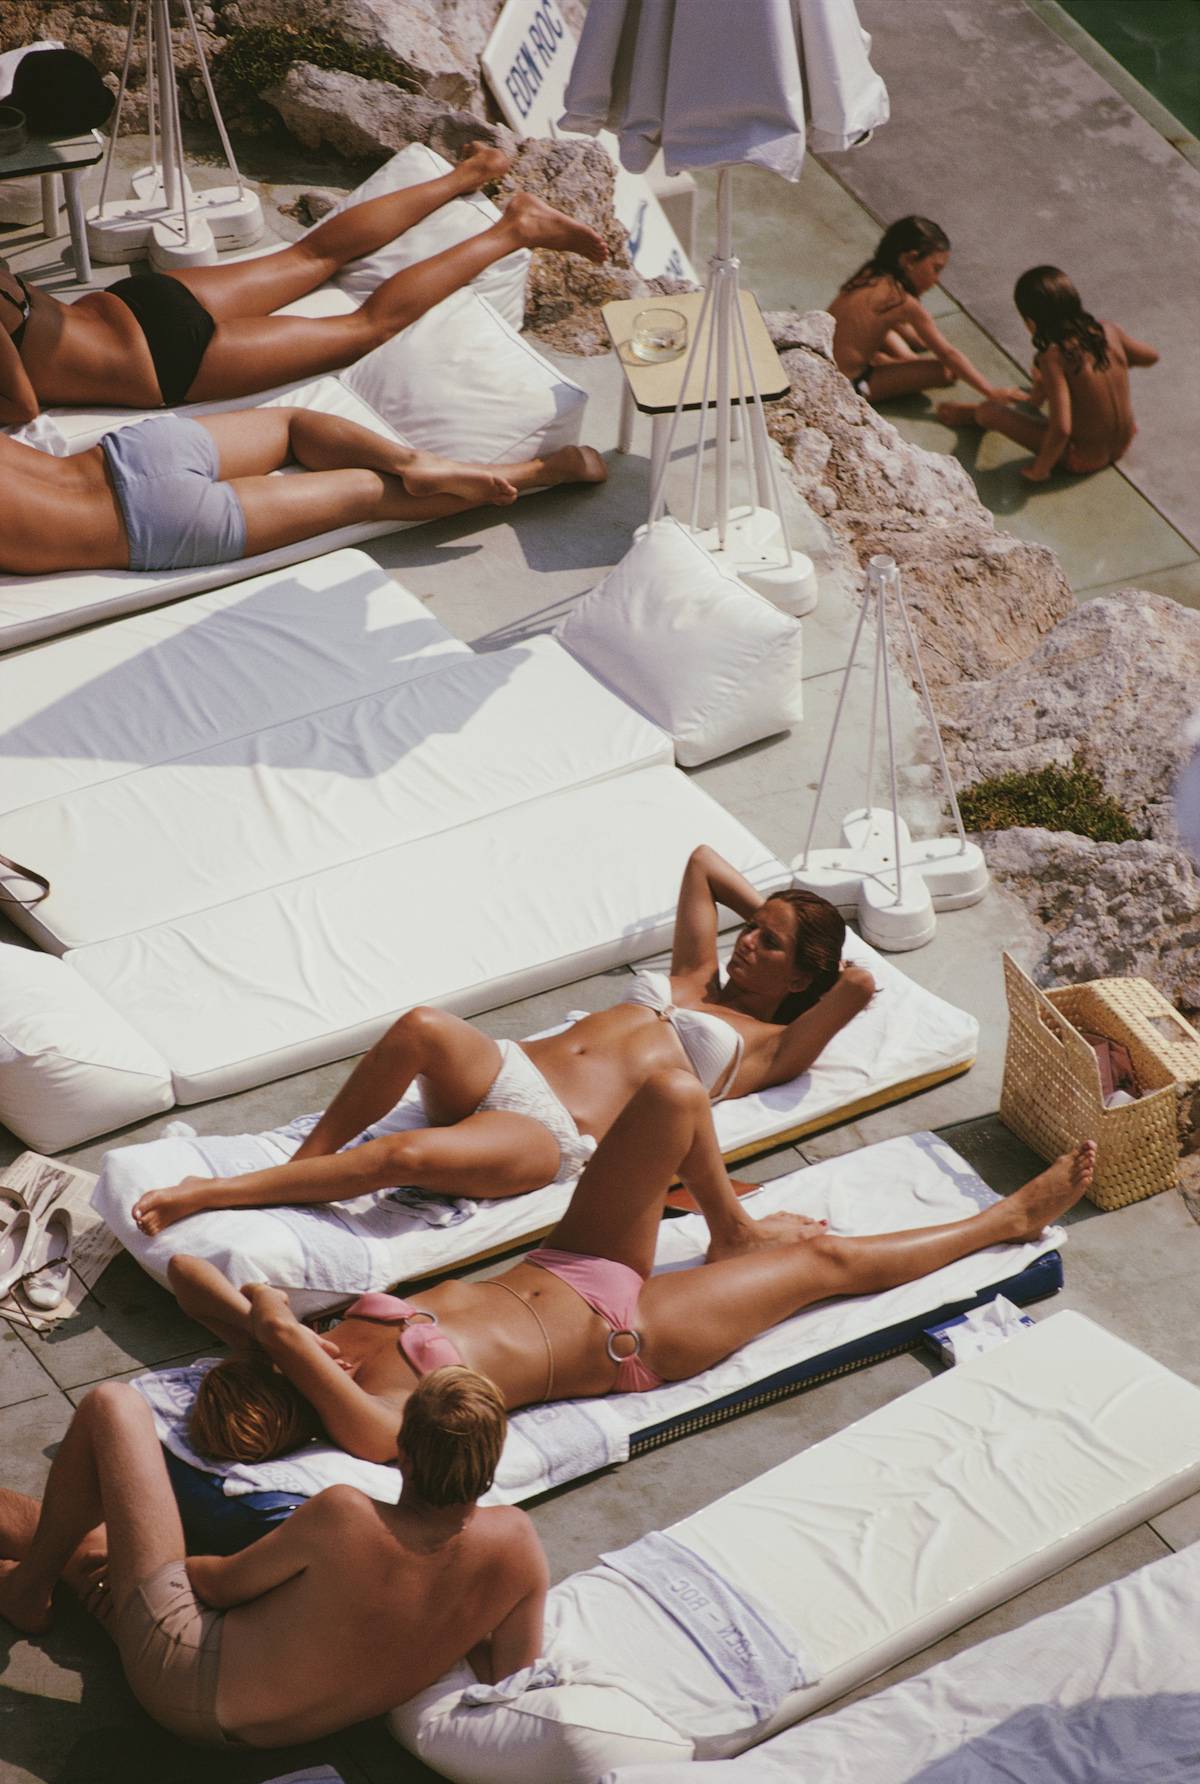 (Fot. Slim Aarons/Hulton Archive/Getty Images)